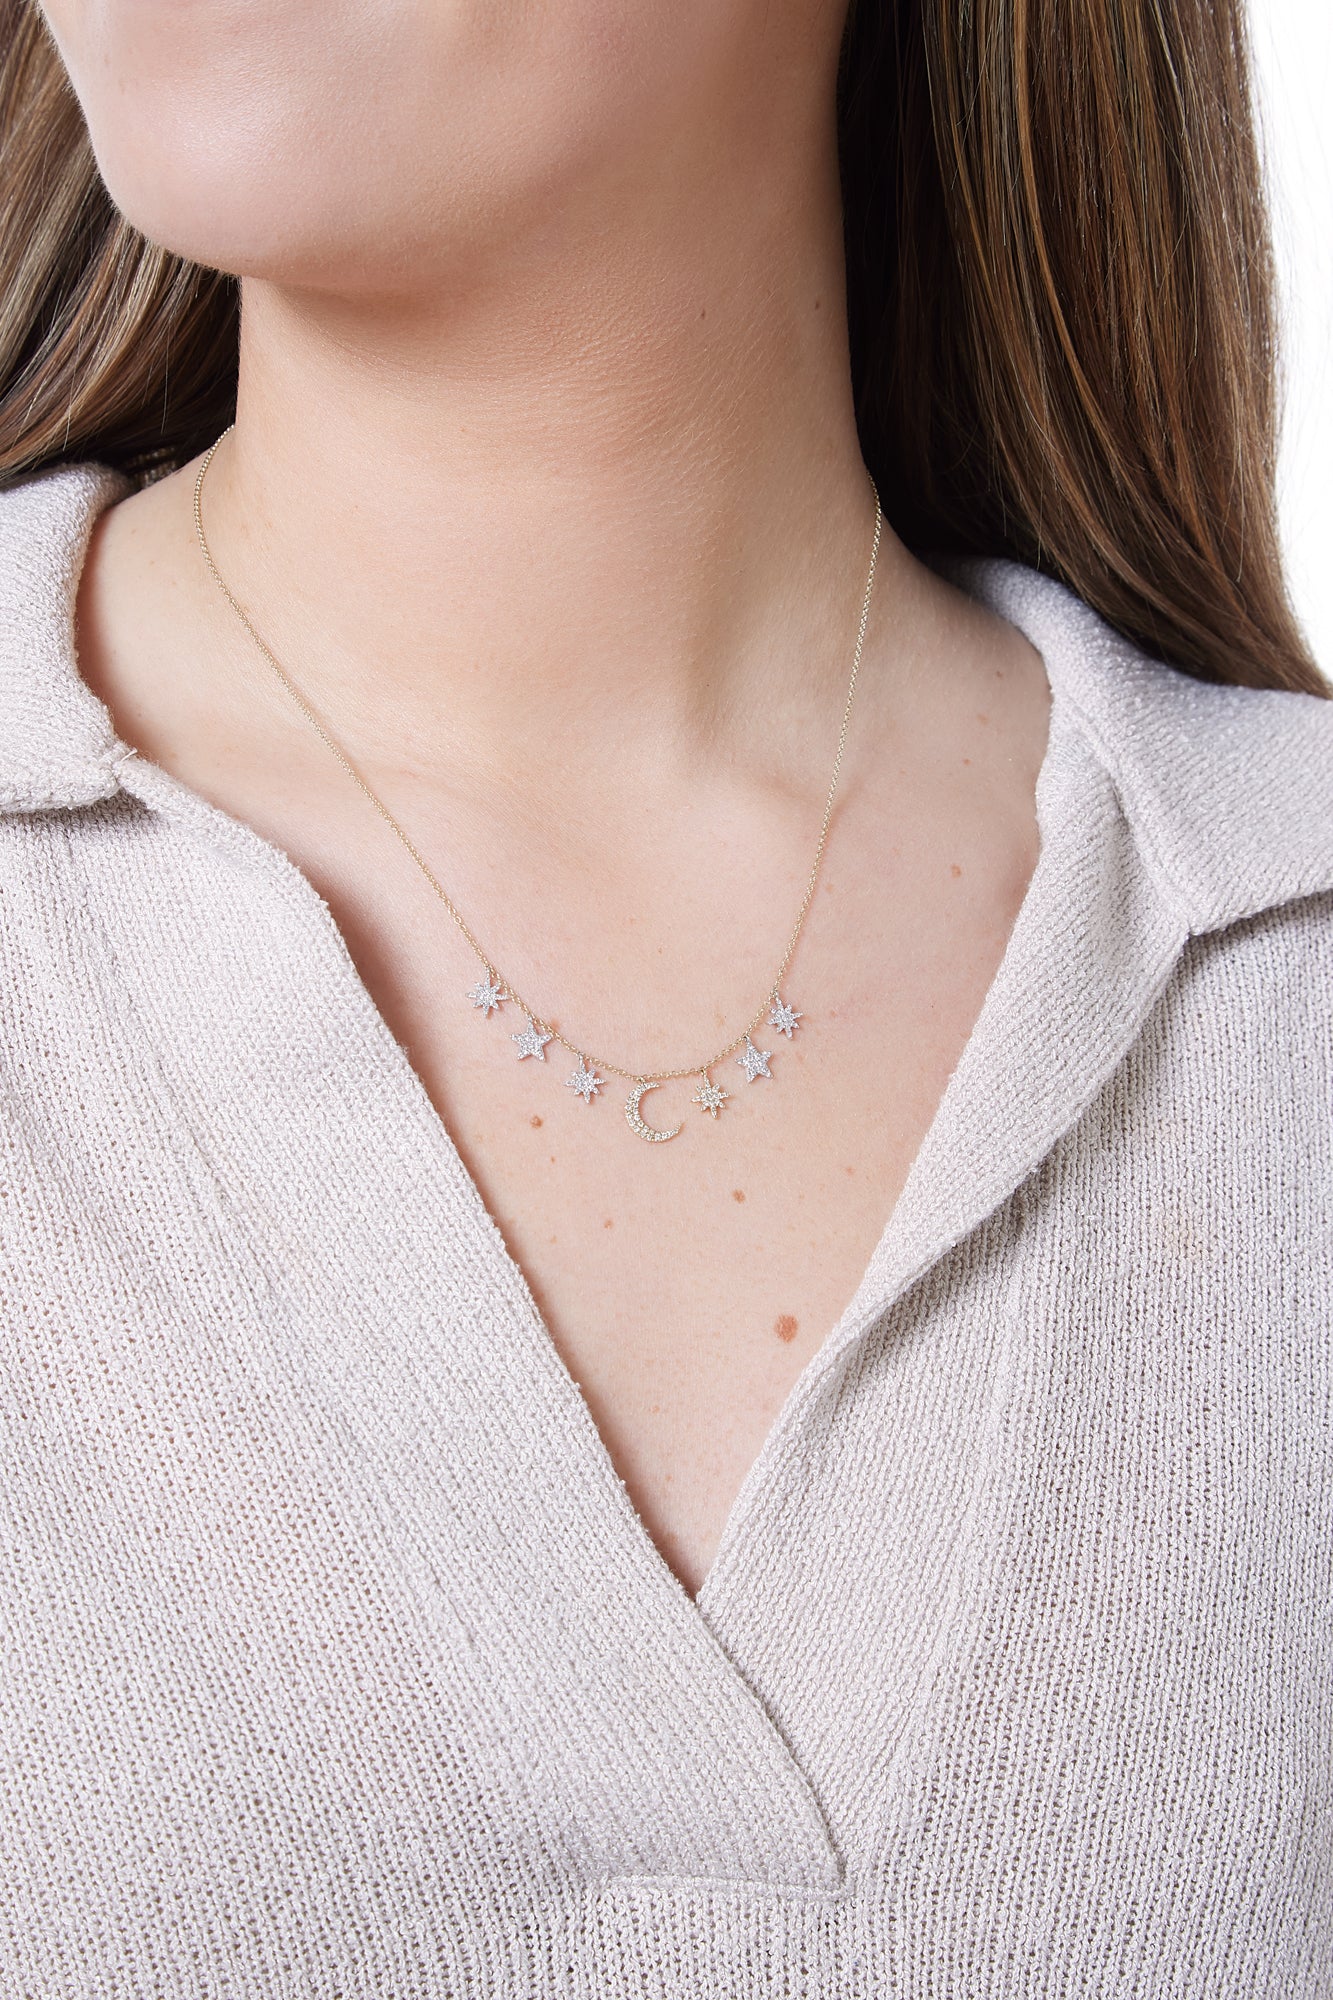 14KY Pave Crescent Moon and Stars Necklace